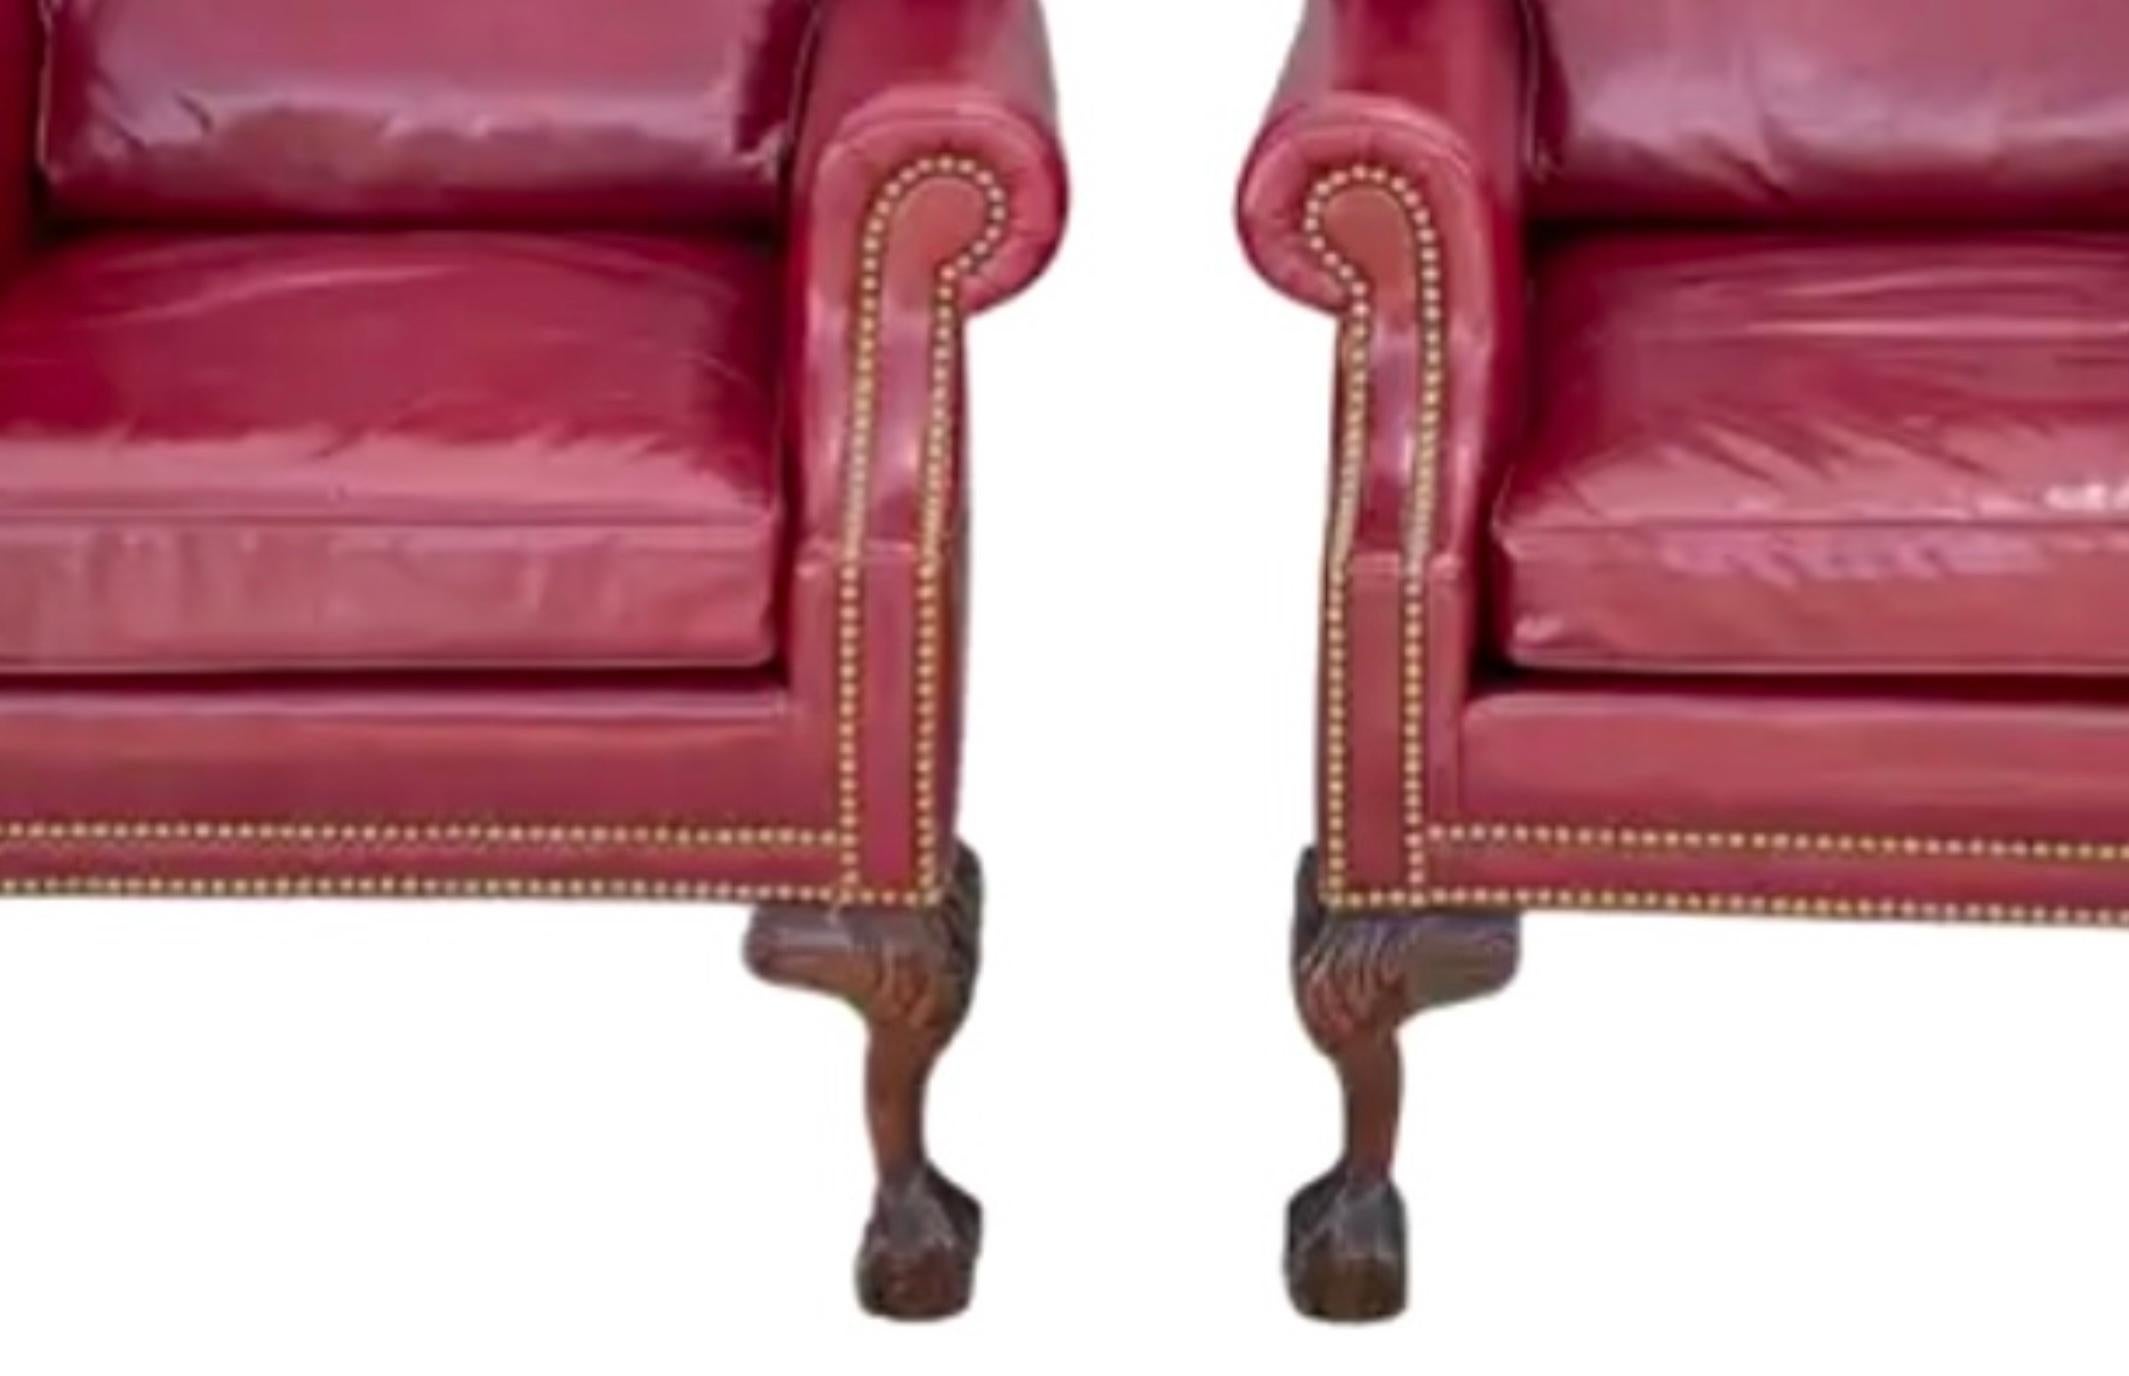 20th Century Pair of Hancock And Moore Wingback Ball And Claw Leather Chairs